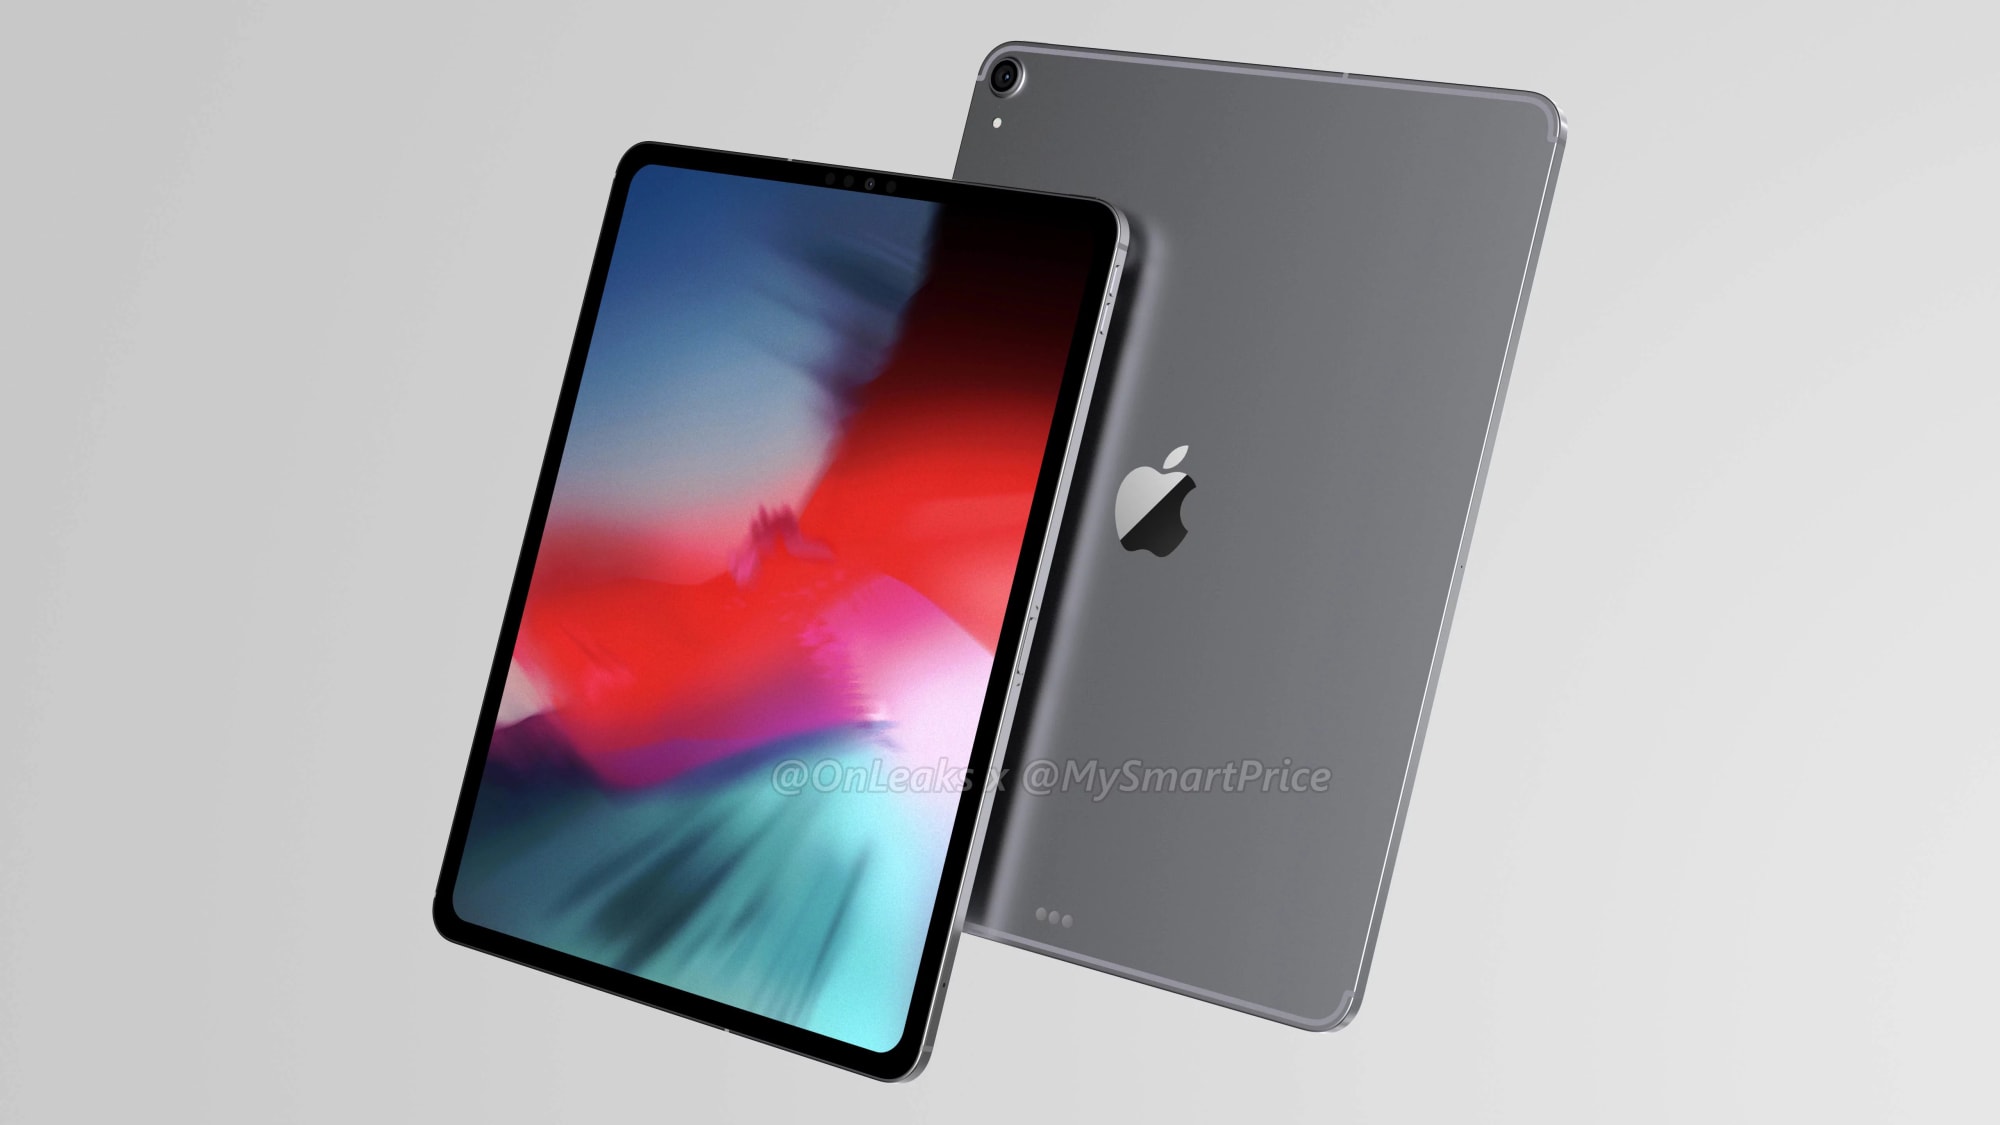 This is what the 2018 iPad Pro might look like.